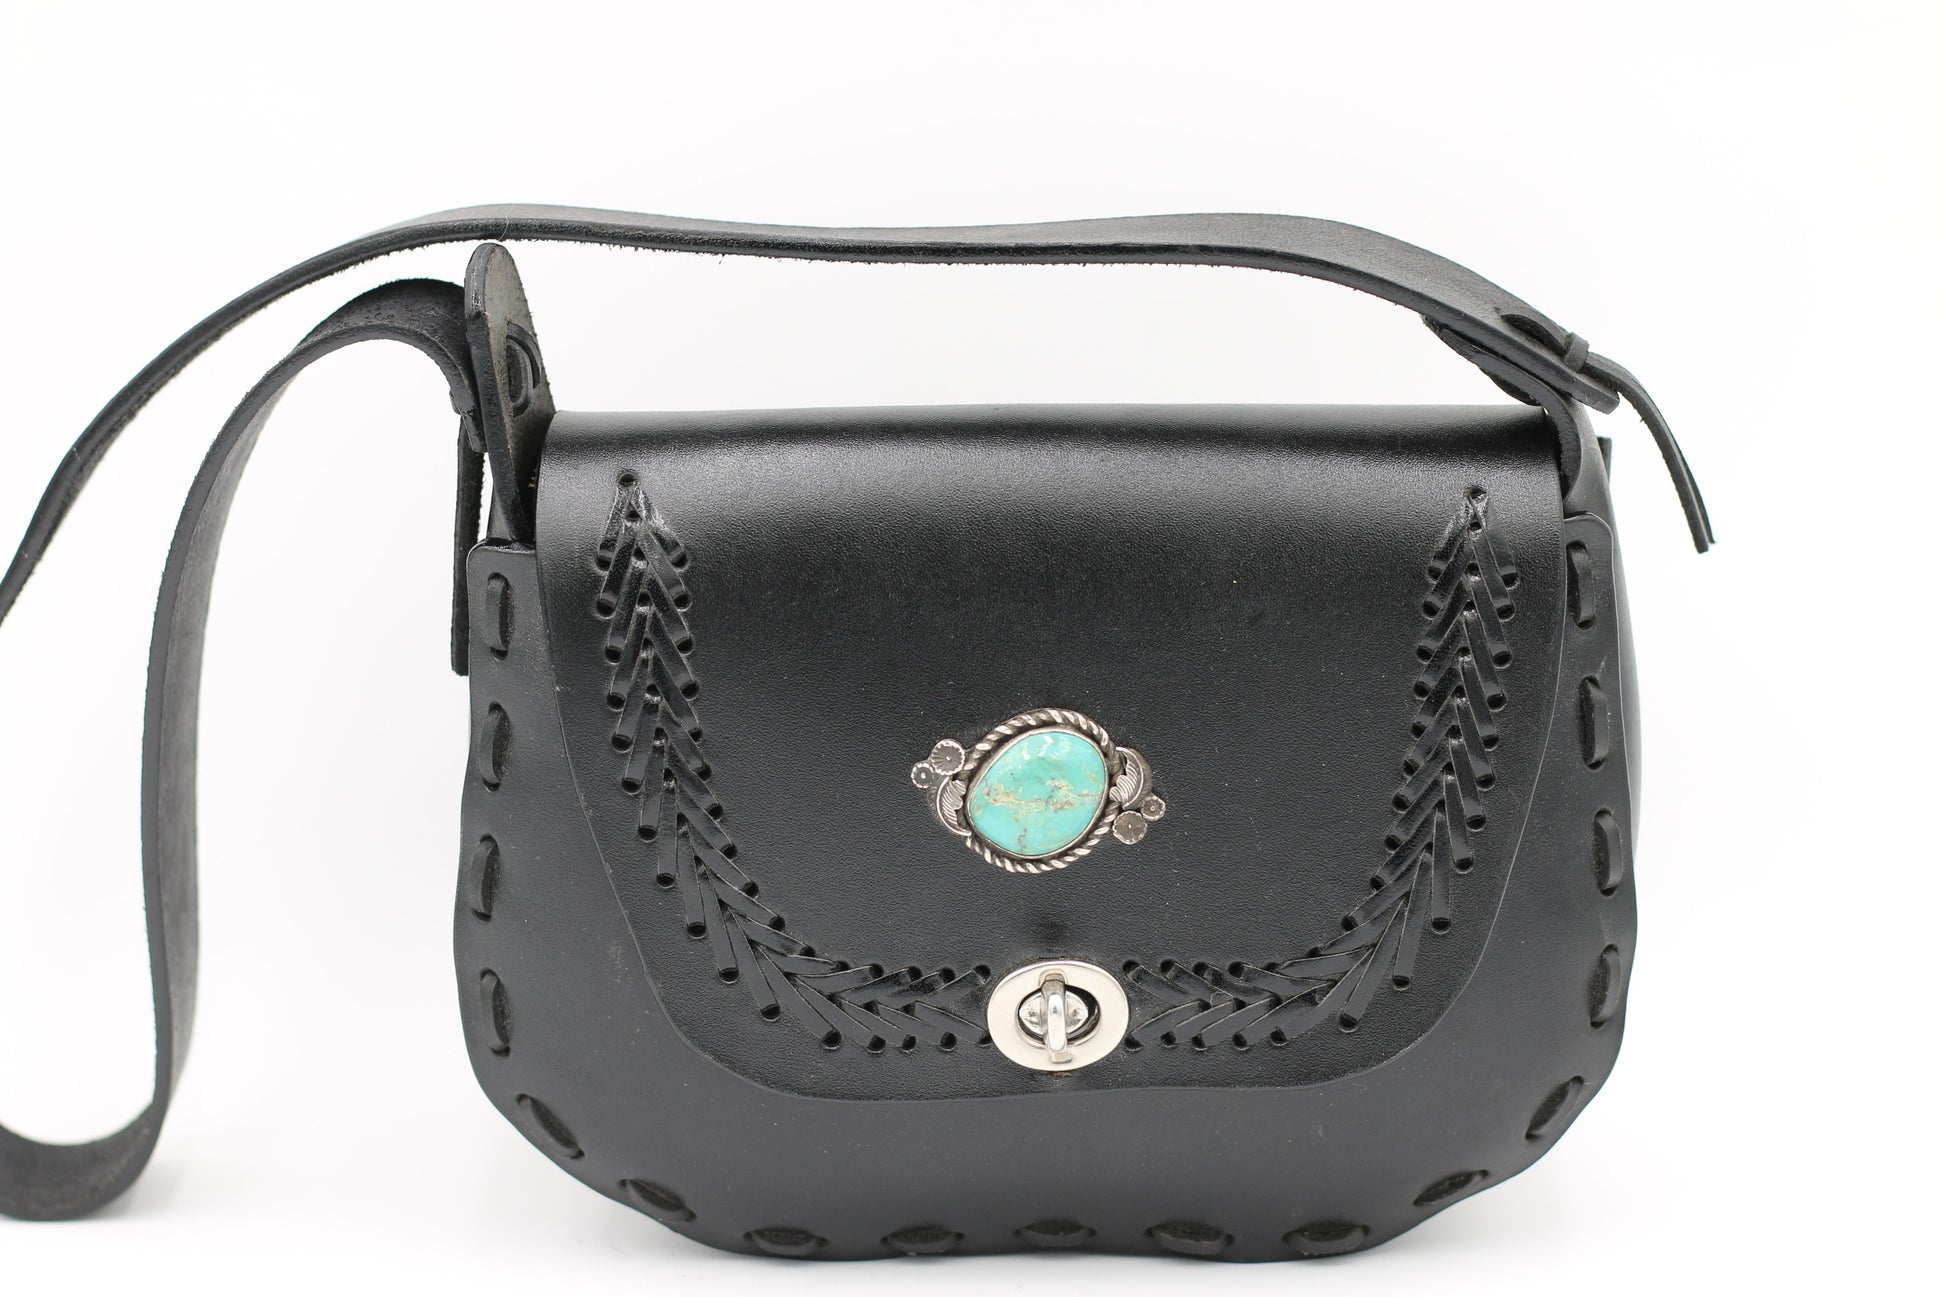 Purse Handcrafted Black Leather with Handcrafted Turquoise Silversmith Cabochon - Annabel's Jewelry & Leather